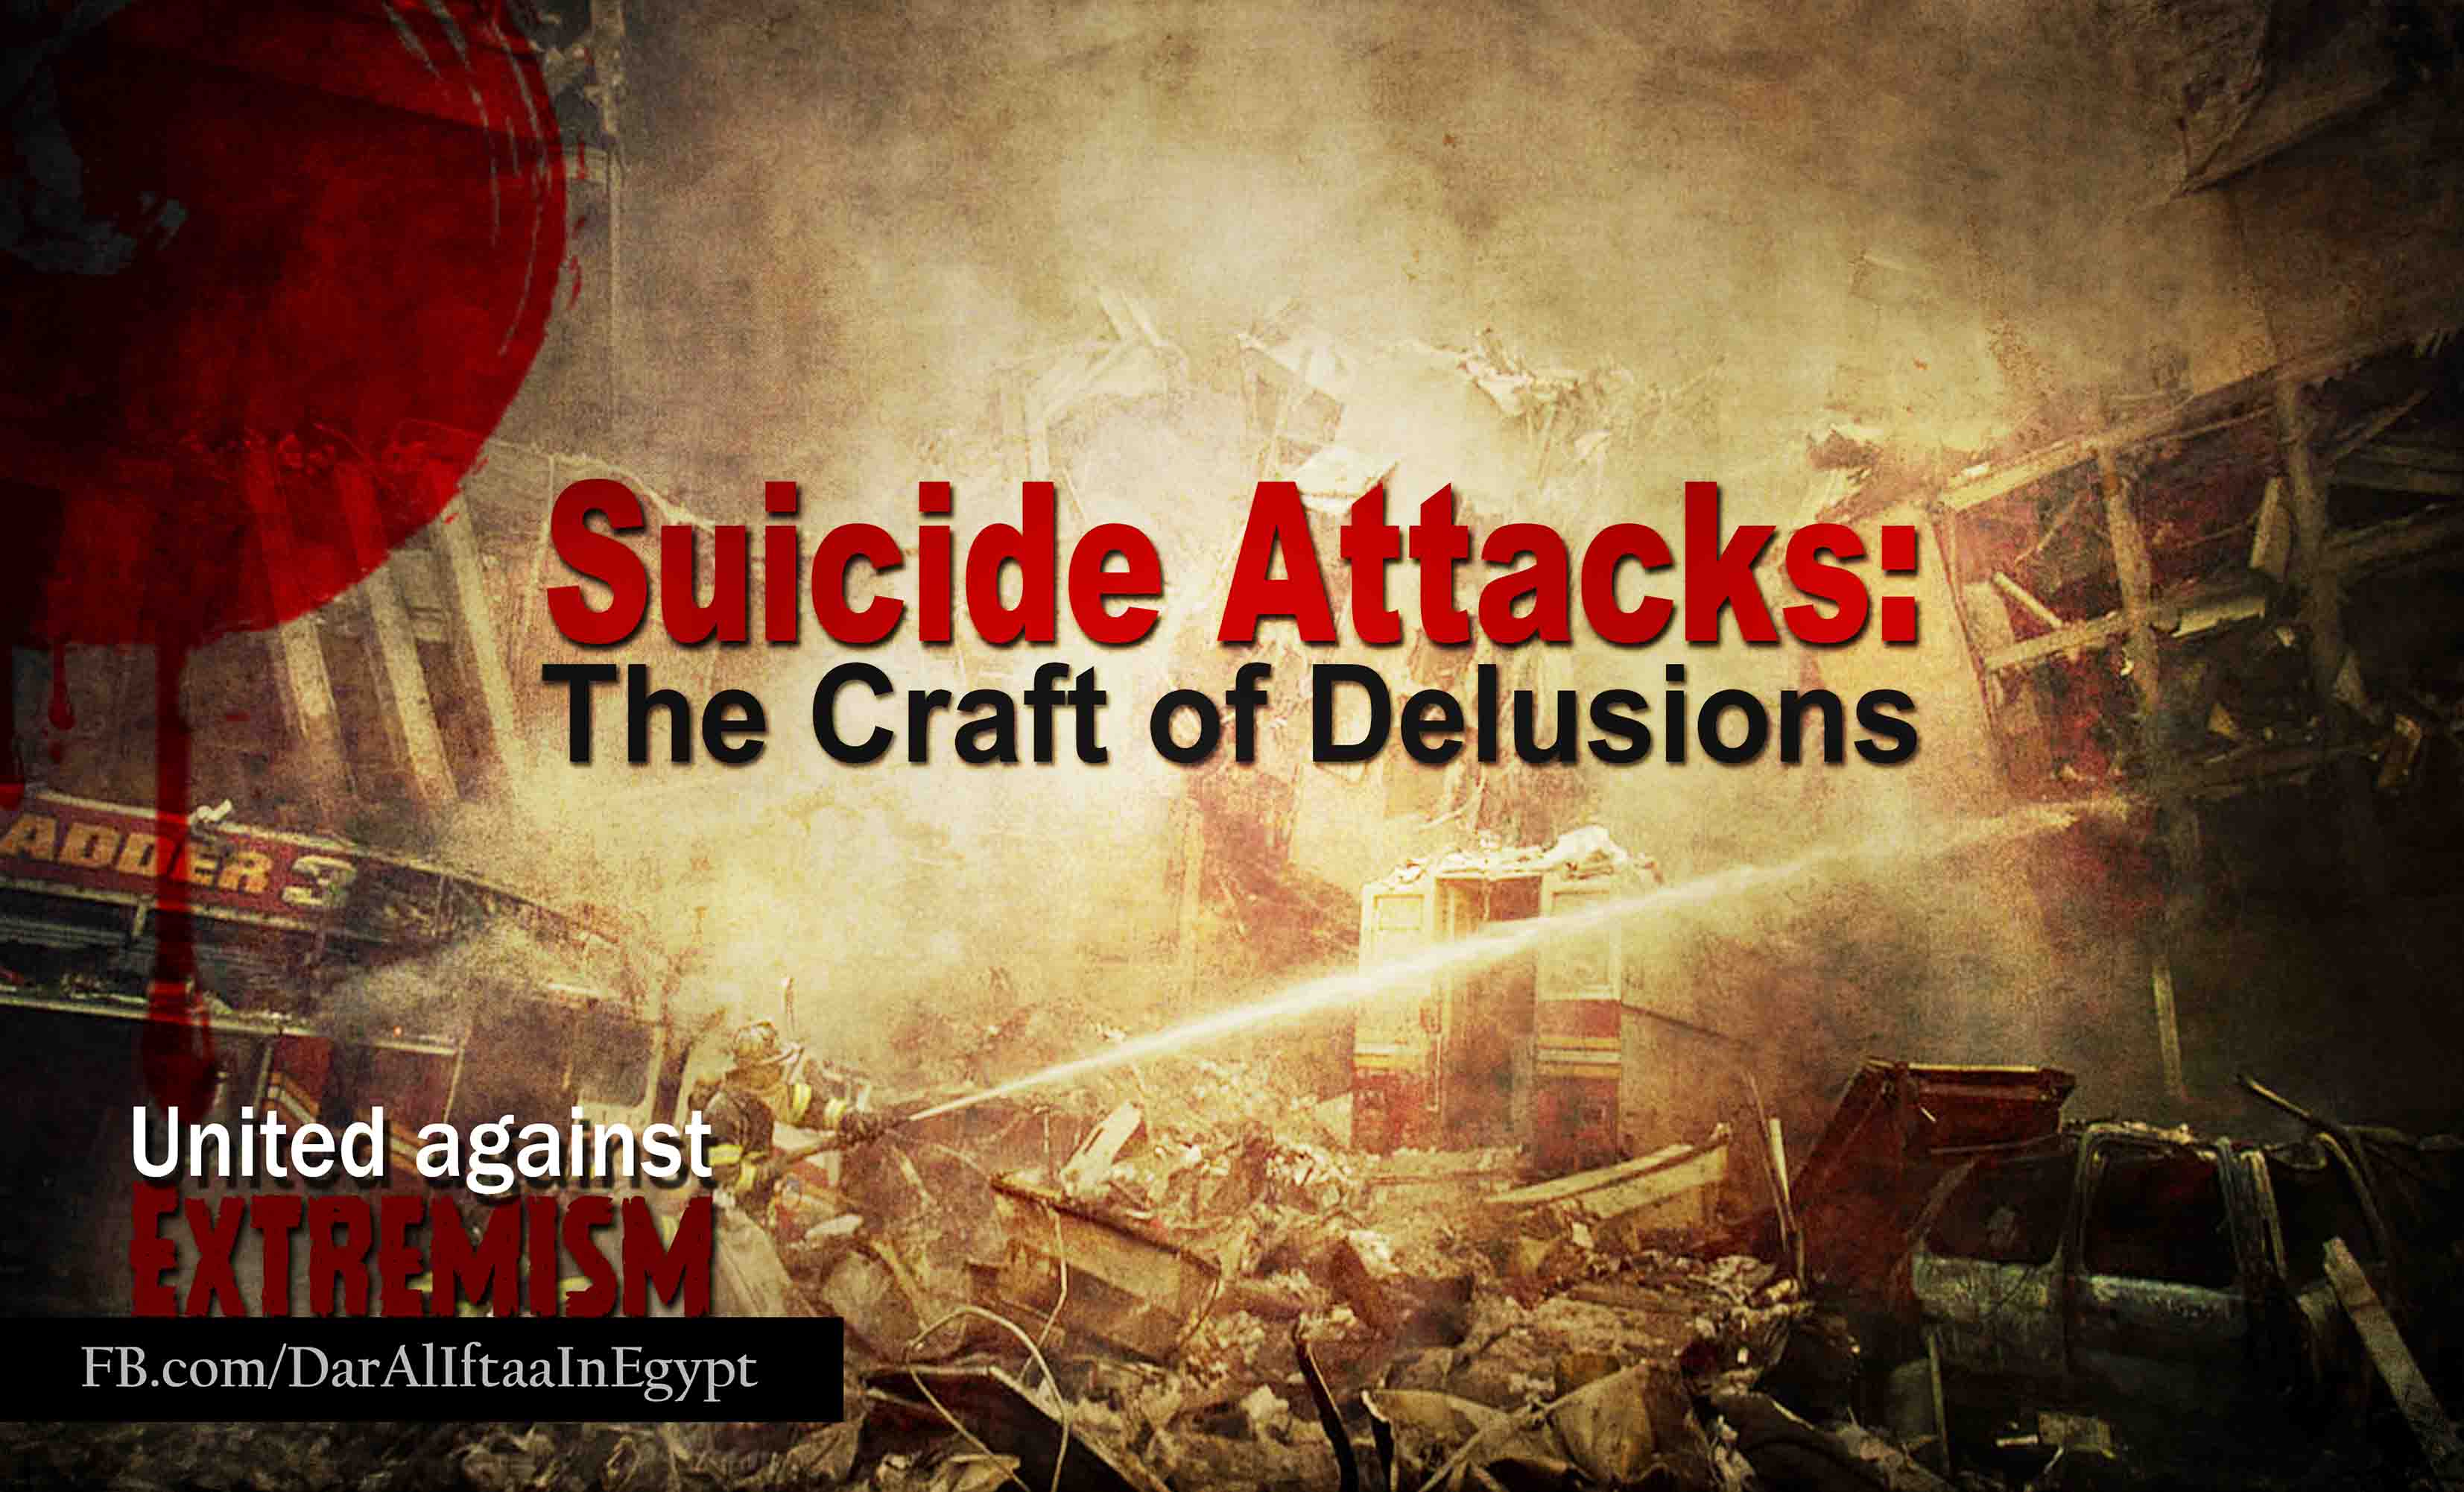 Suicide Attacks: The Craft of Delusions